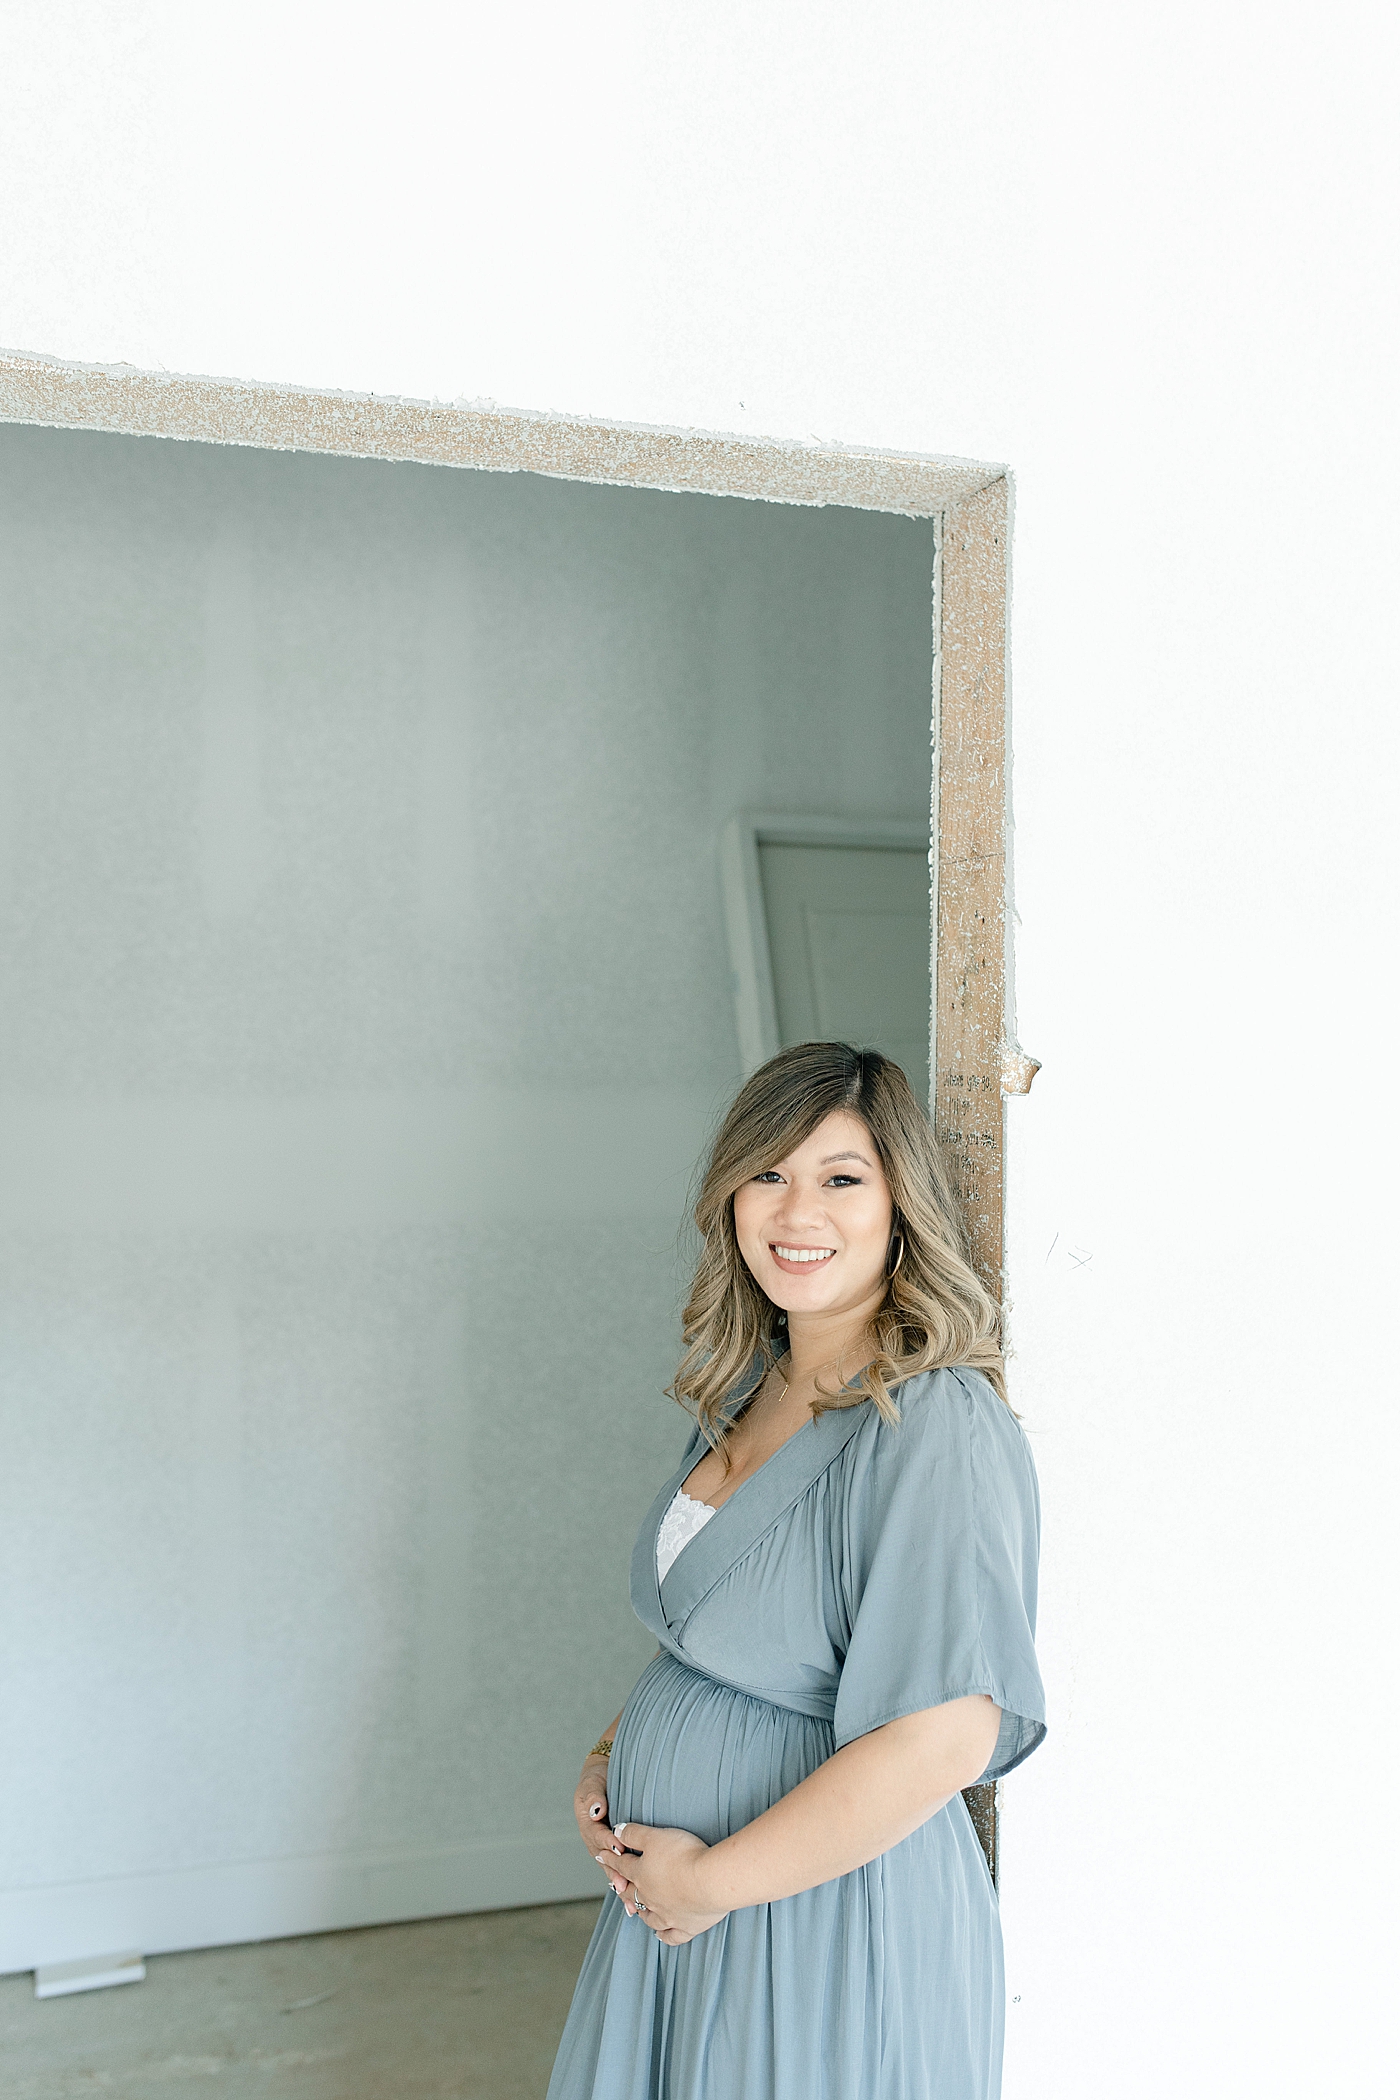 Mom to be in blue in hallway of new home being built | Photo by Little Sunshine Photography 